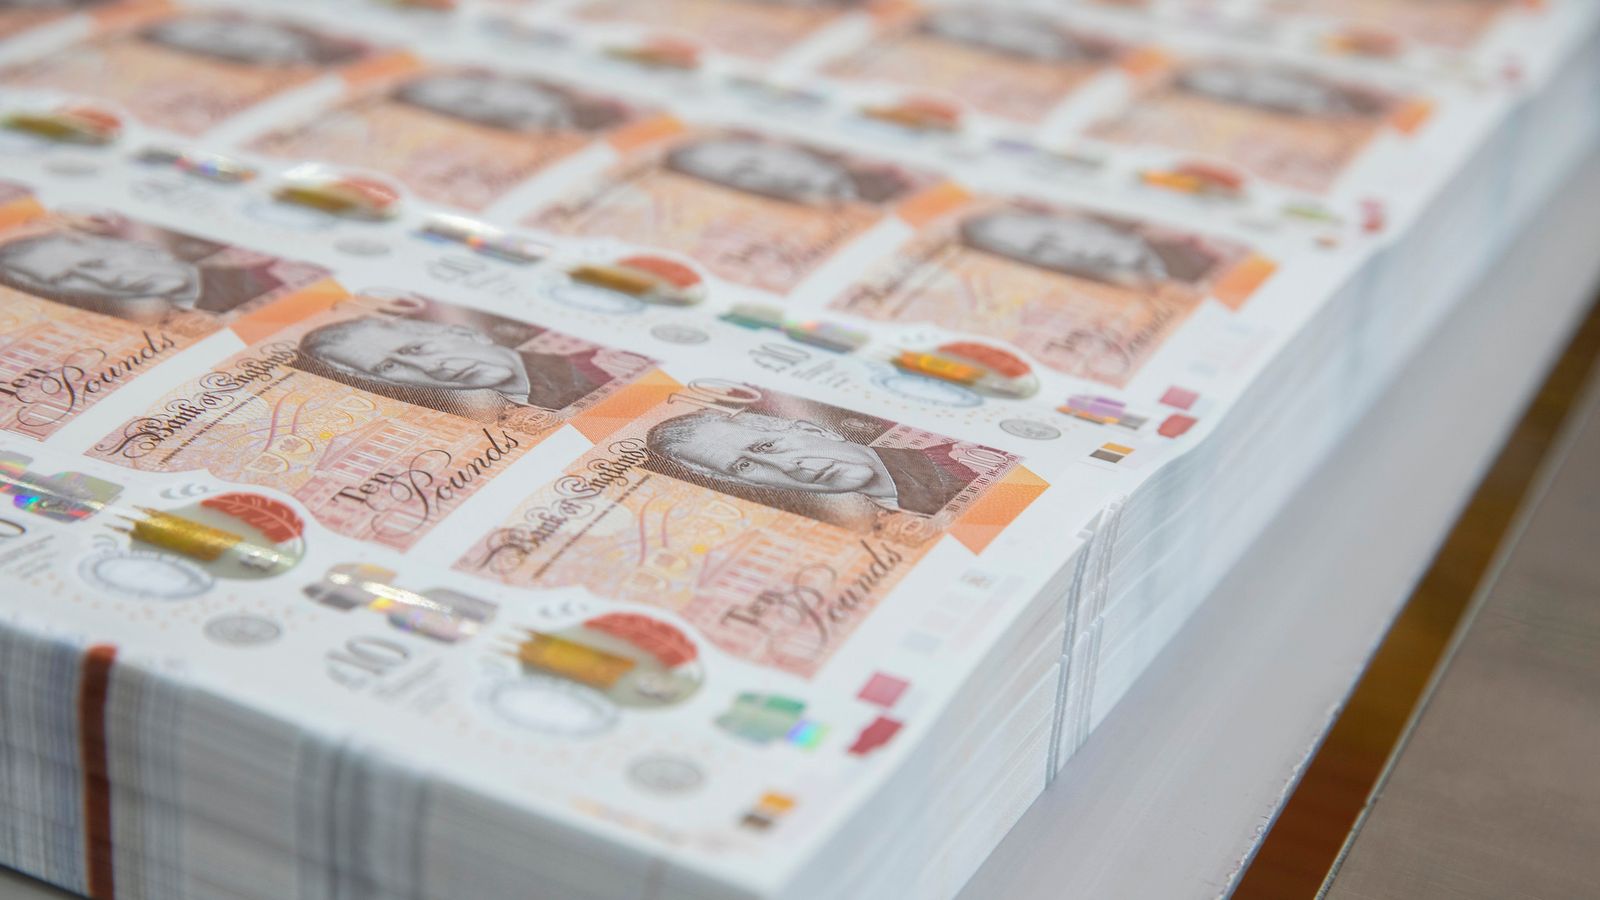 Bank of England's new King Charles notes to enter circulation from 5 June